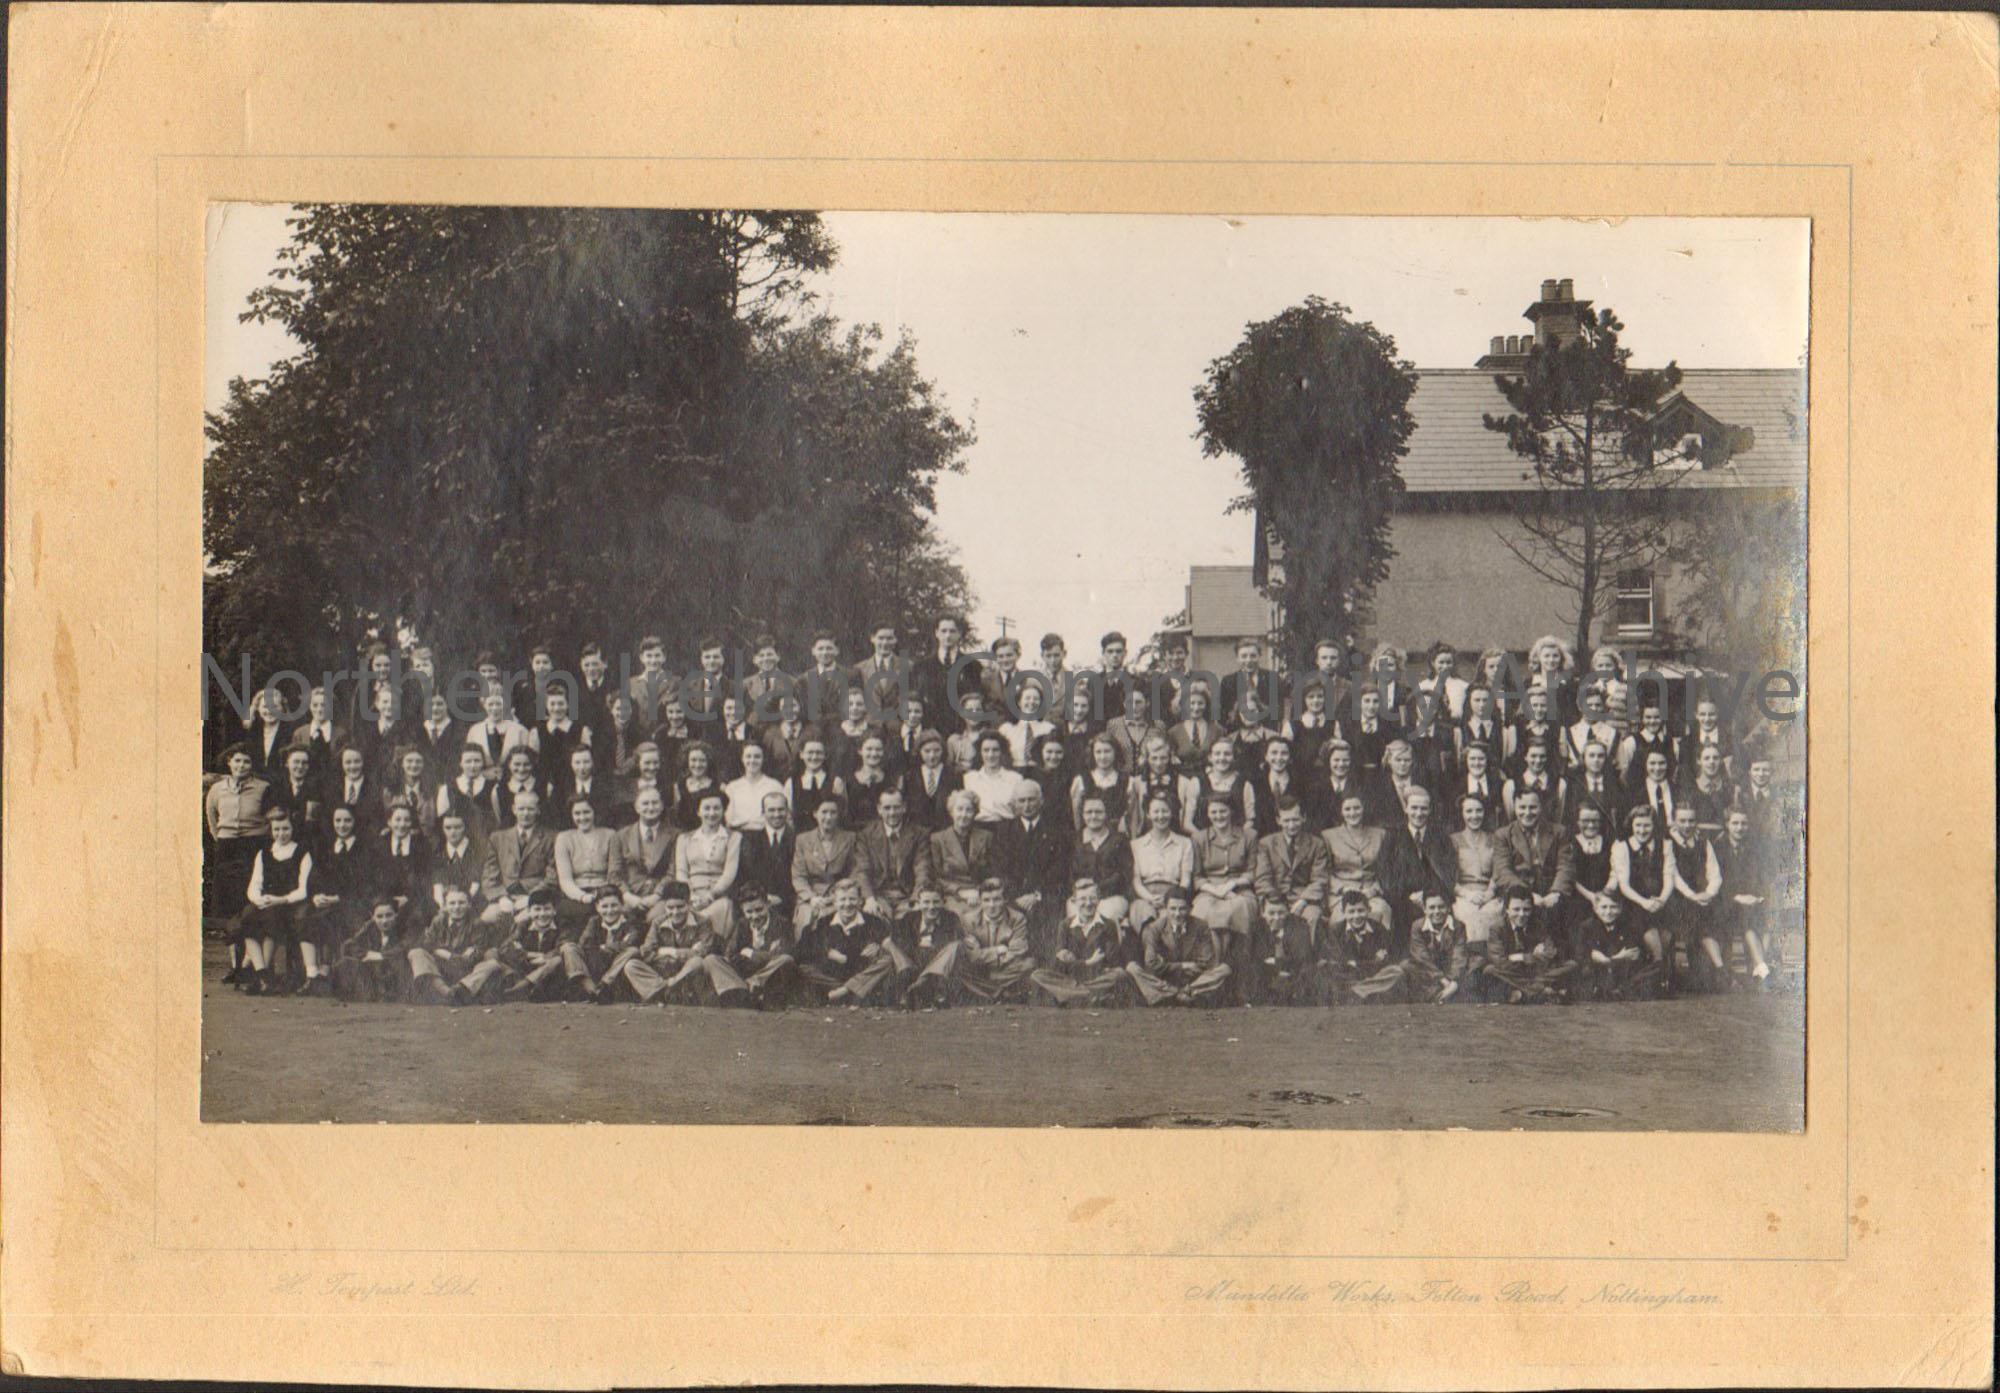 Black and white photograph of pupils and teachers from Ballymoney Technical School. Mounted on brown cardboard